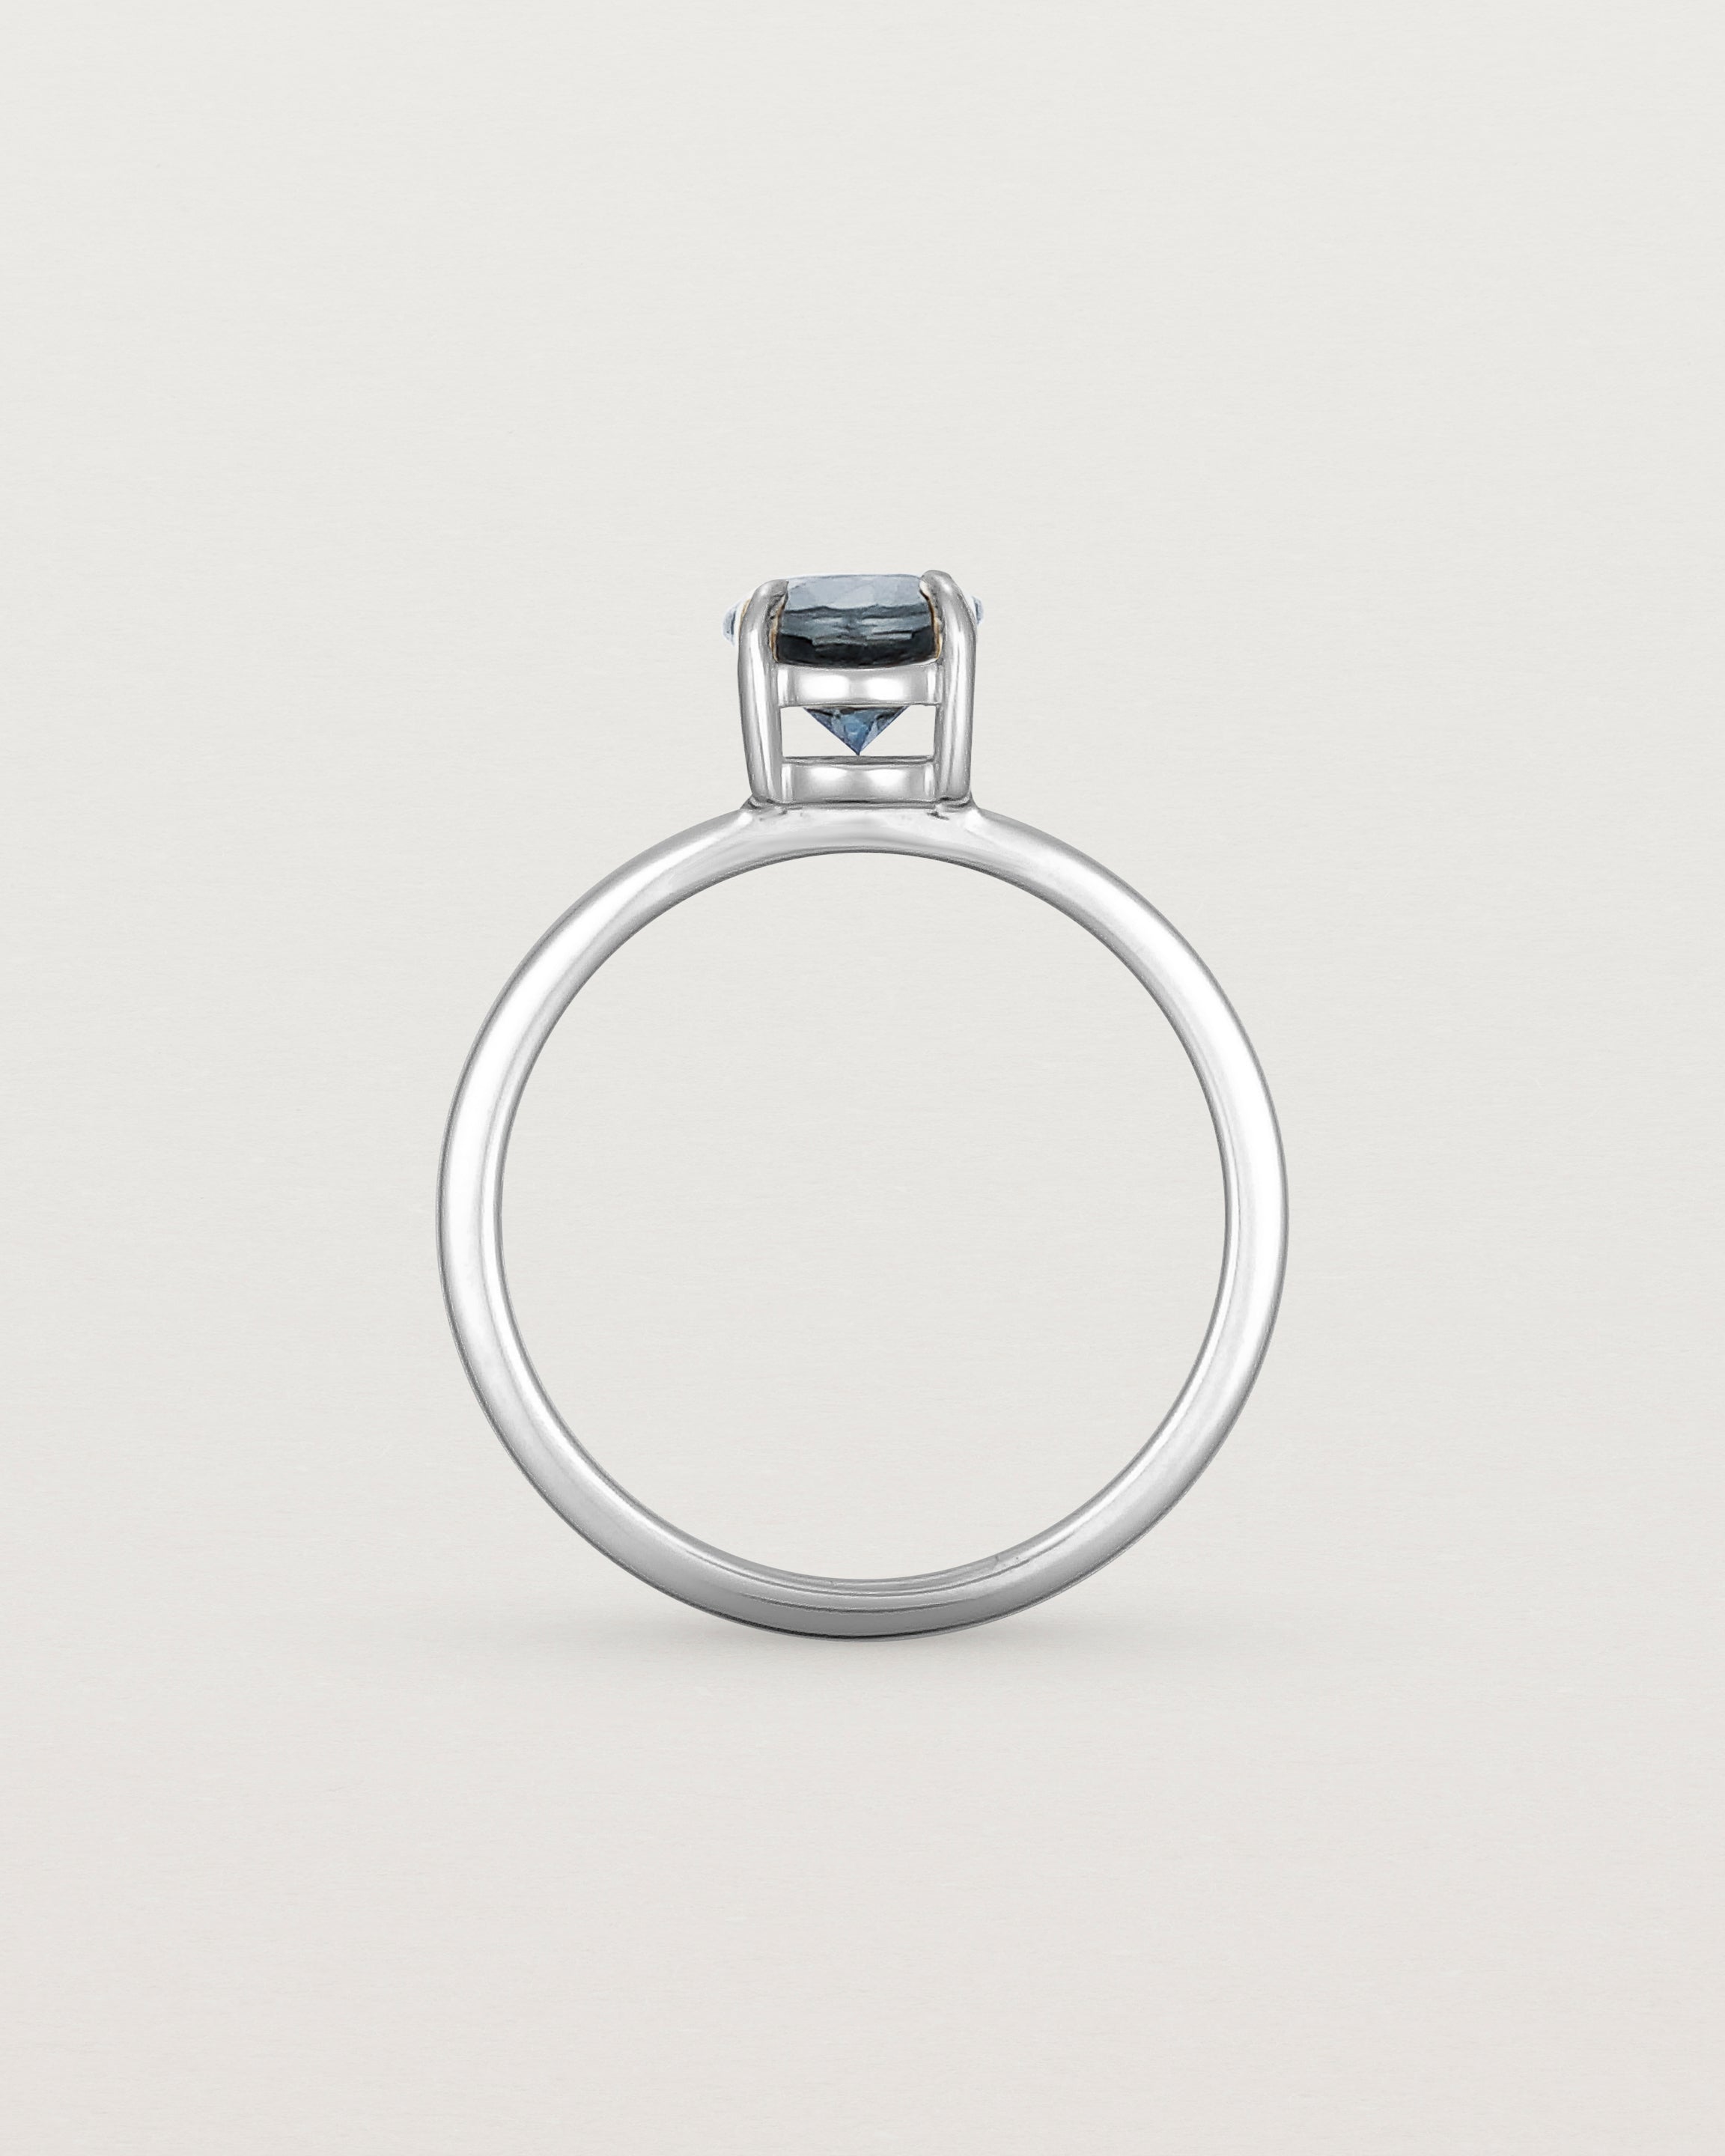 Standing view of the Petite Una Round Solitaire | Australian Sapphire | White Gold.